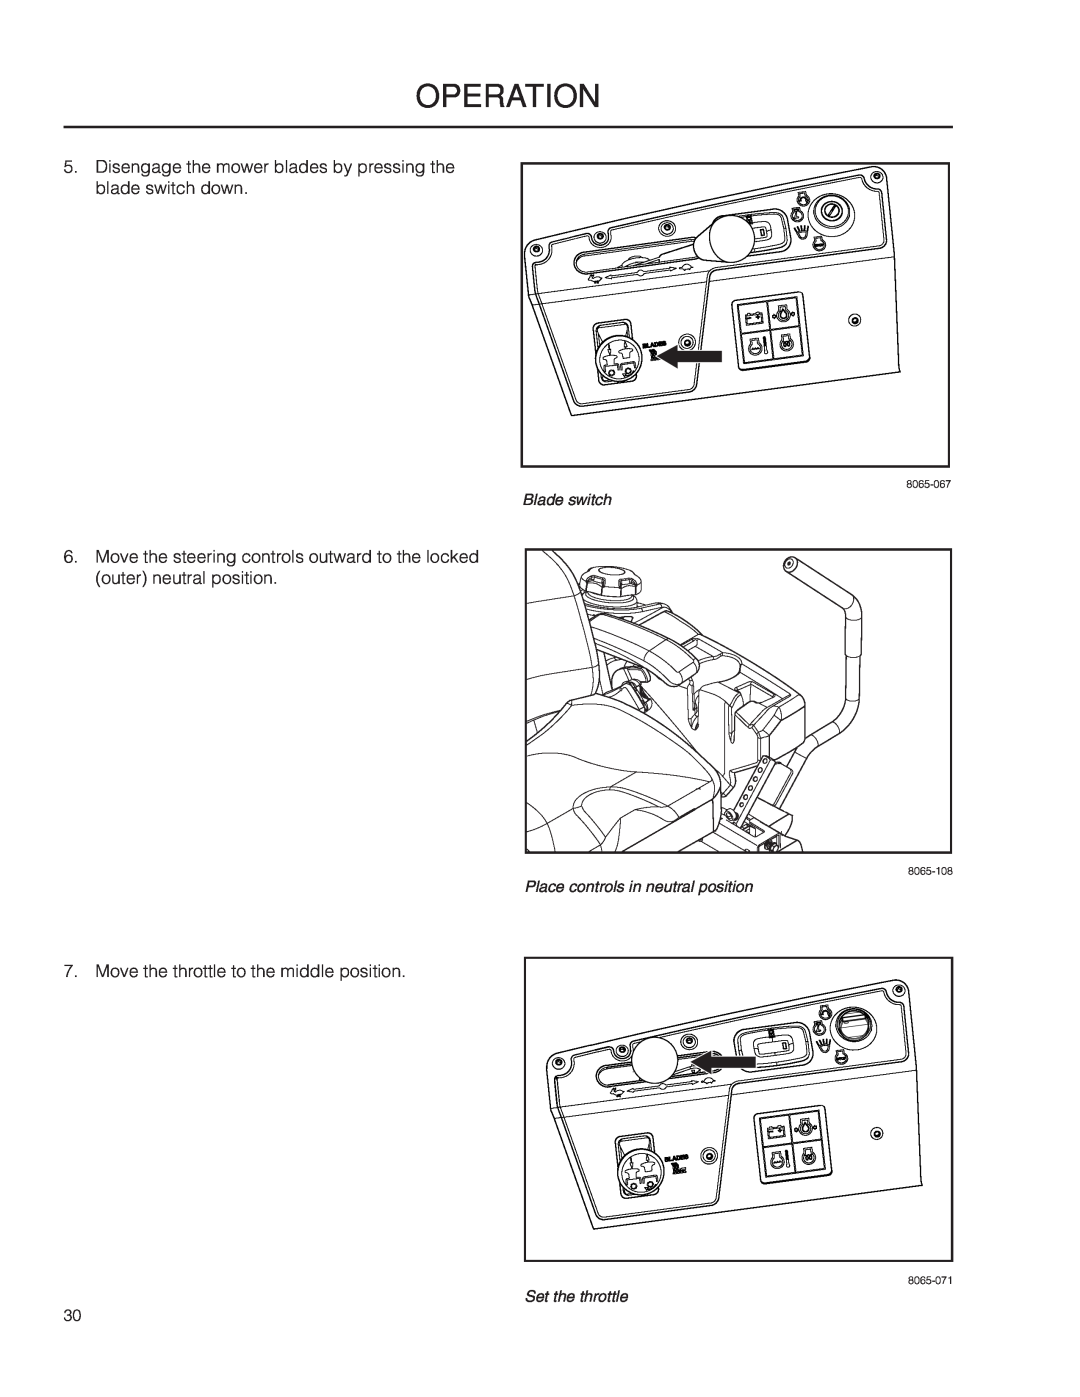 Husqvarna 966616701, PZ29D CE manual Operation, Disengage the mower blades by pressing the blade switch down, Blade switch 